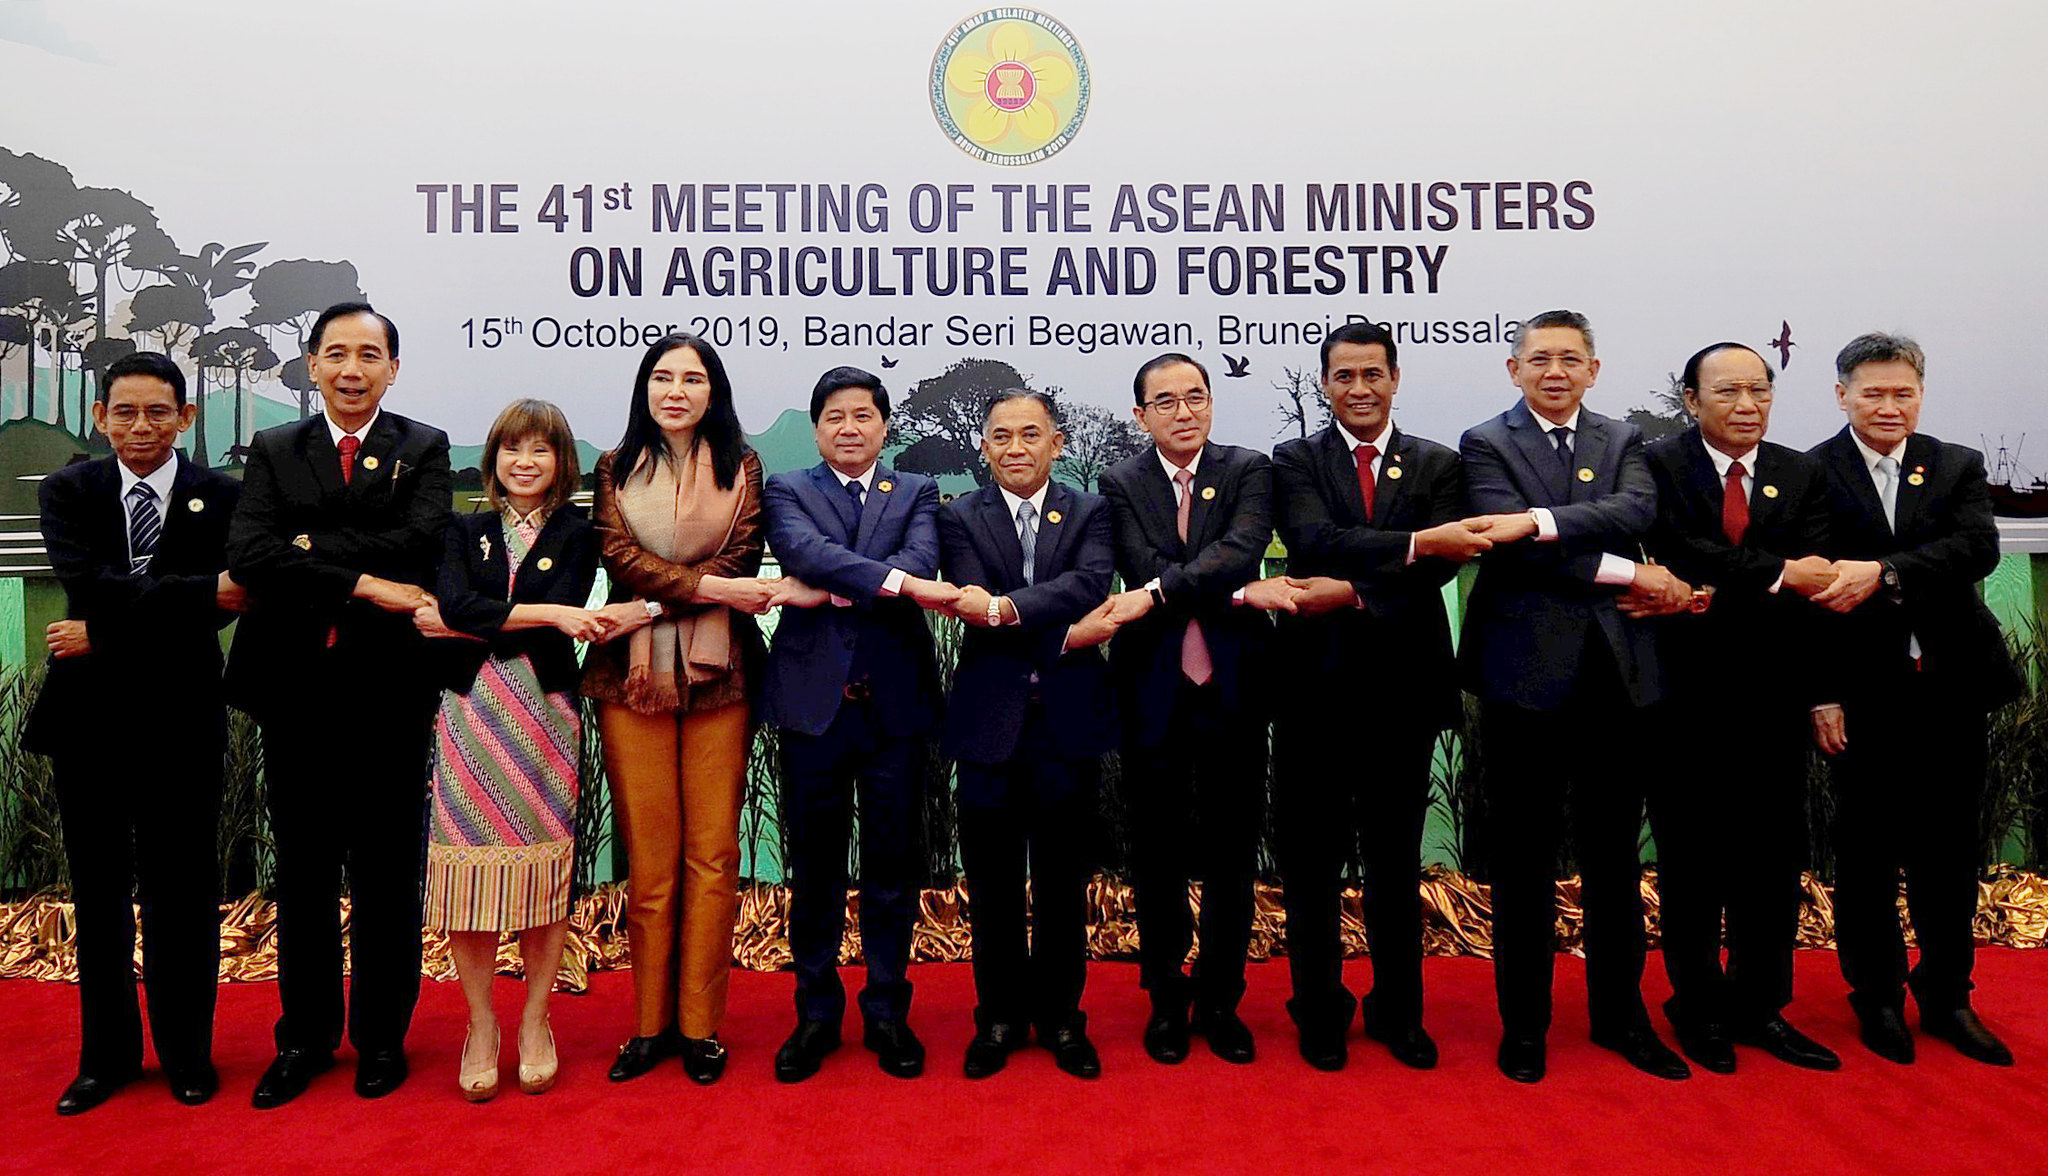 The Fourty First Meeting of The ASEAN Ministers on Agriculture and